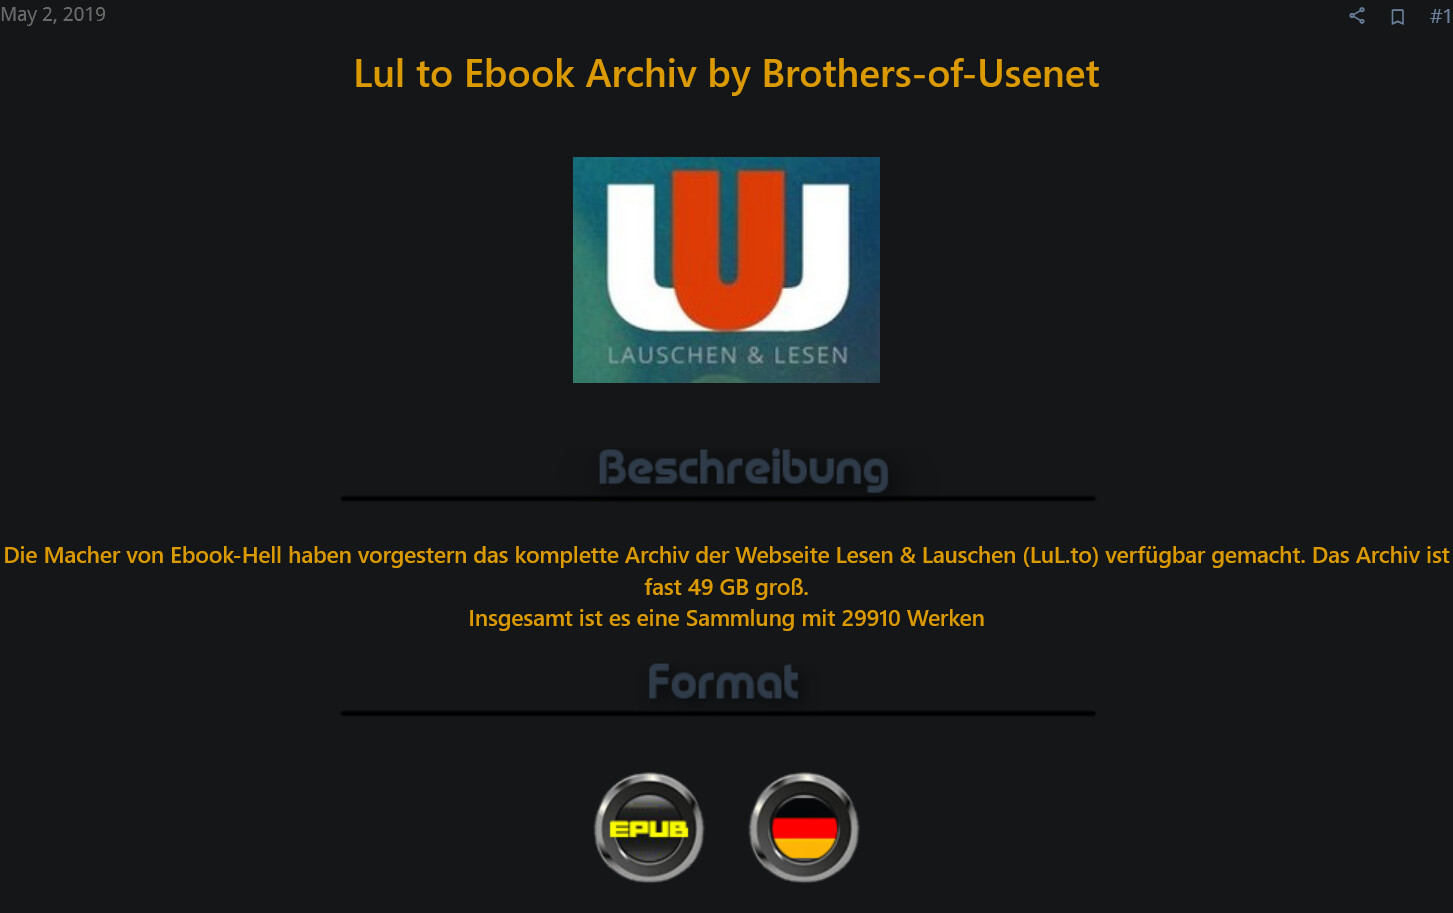 Screenshot 2021-06-14 at 22-13-44 Romane - Lul to Ebook Archiv by Brothers-of-Usenet